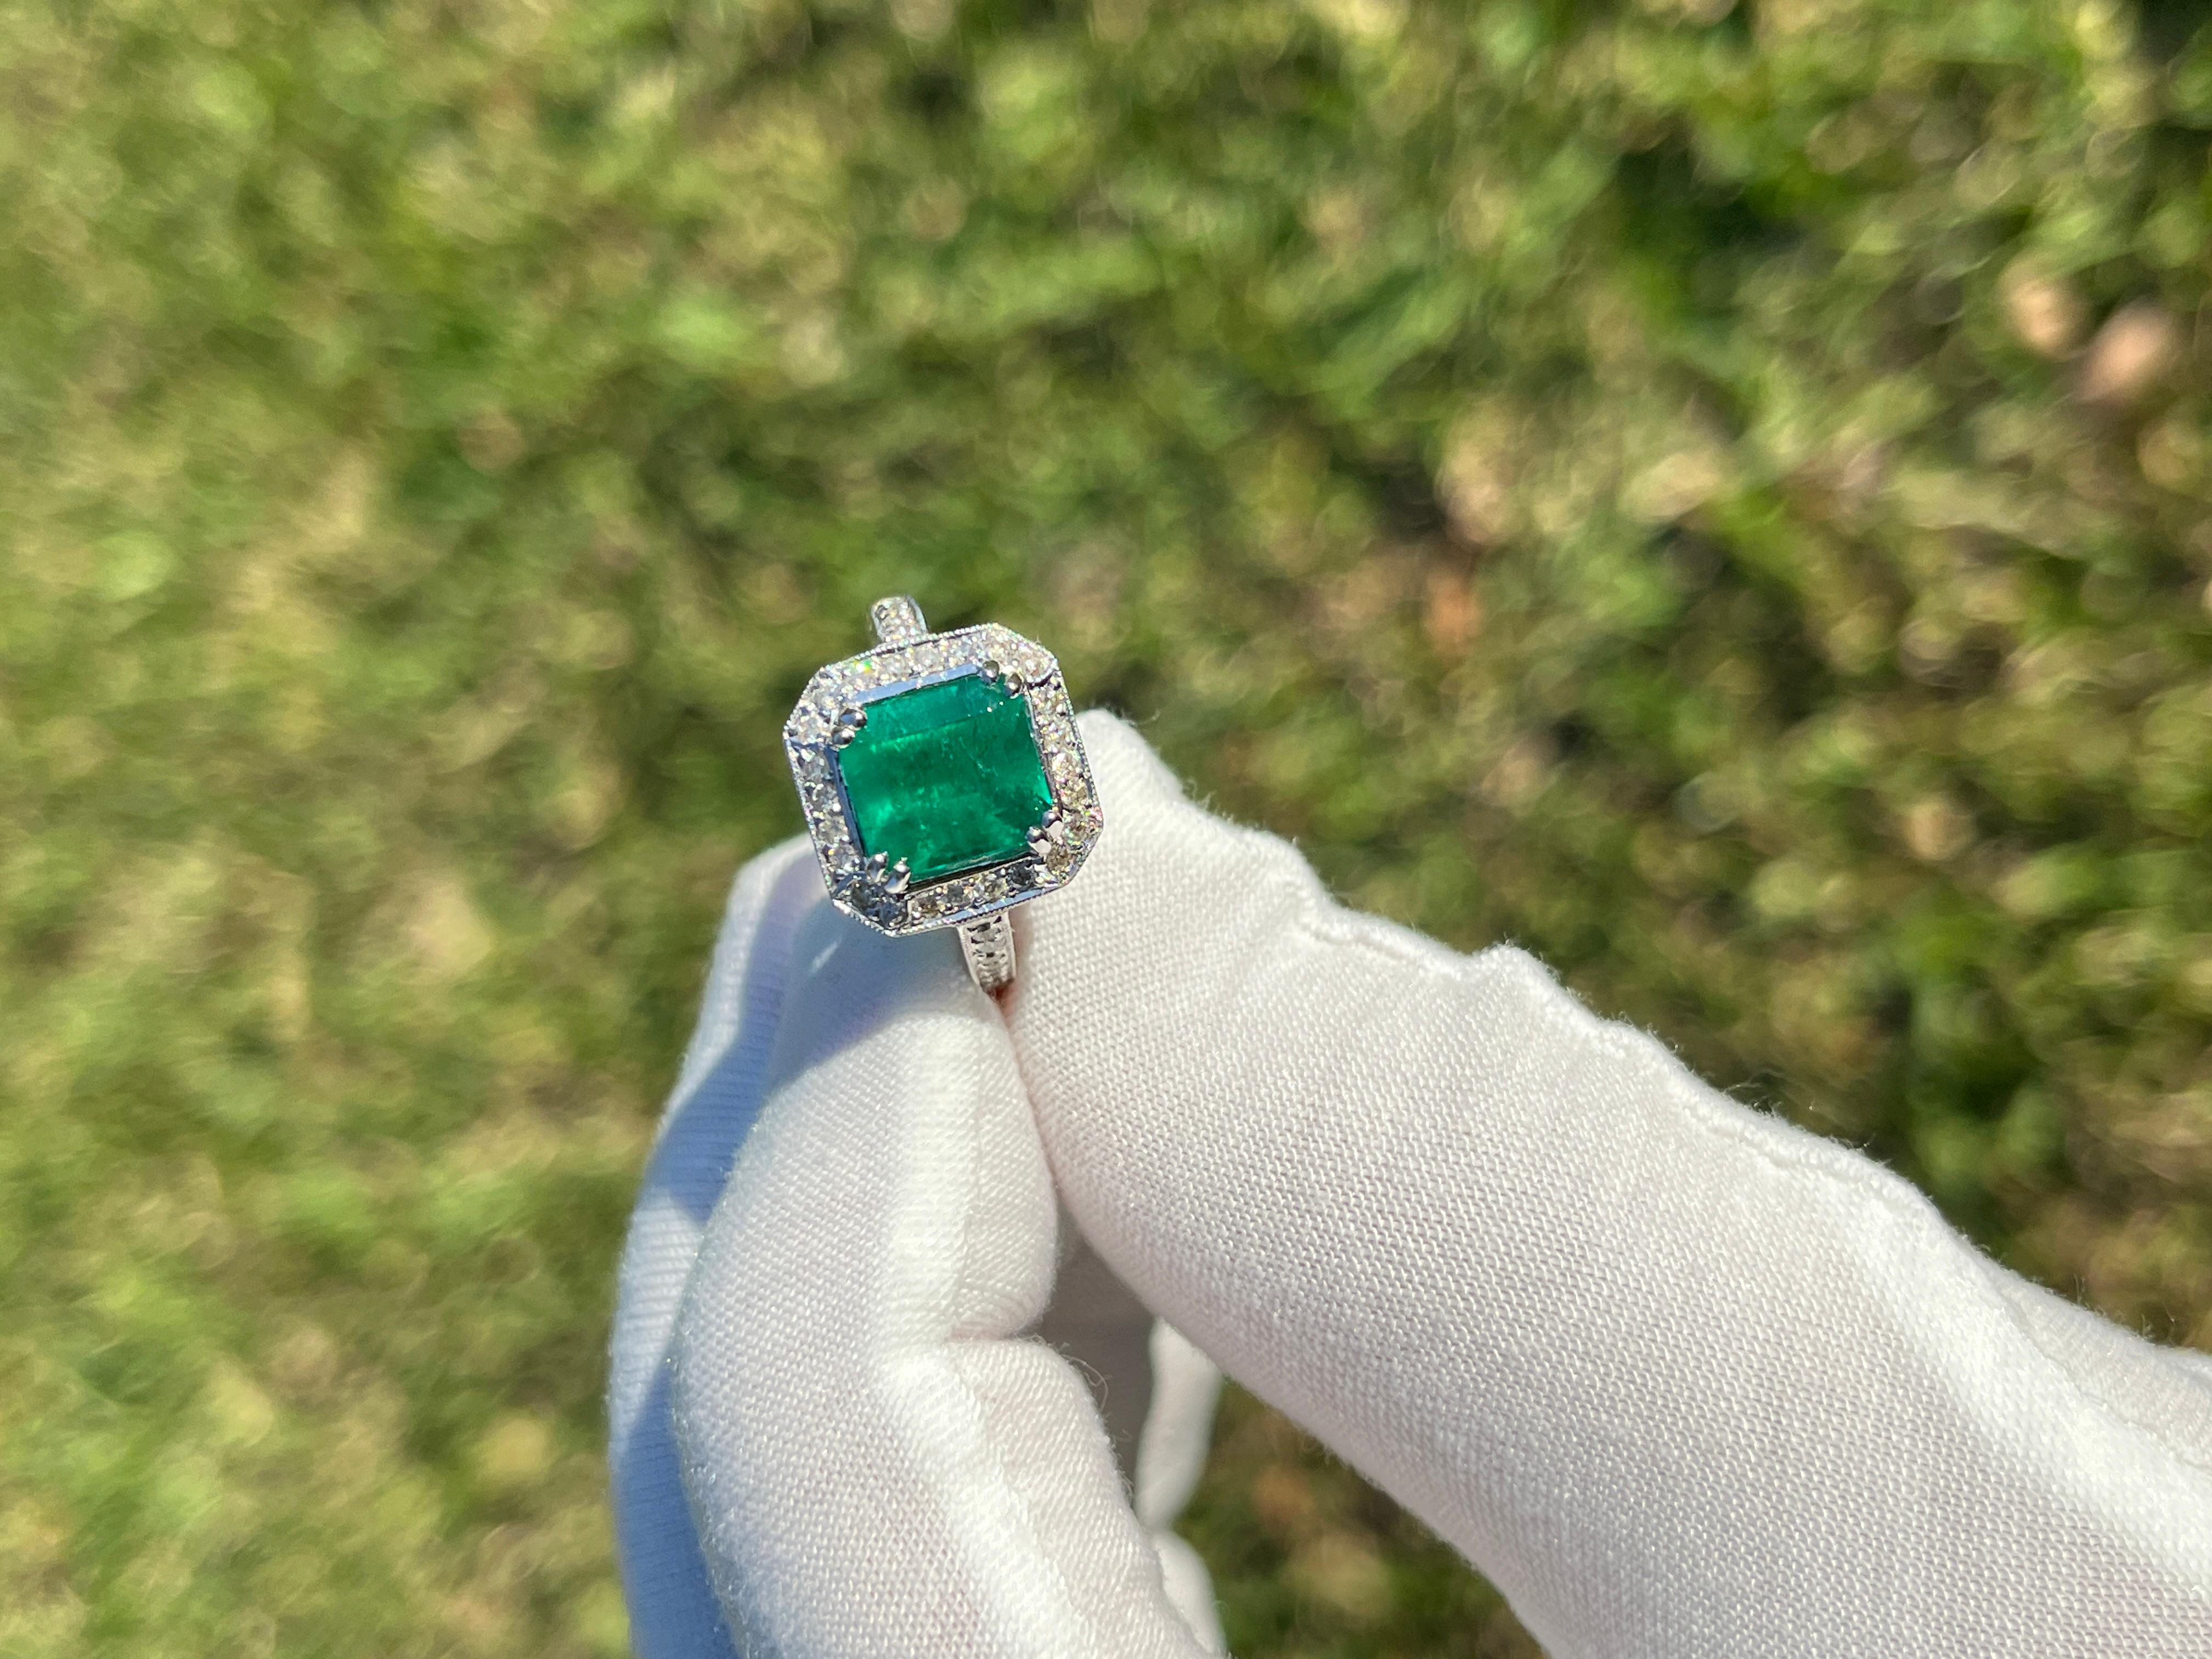 3 Carat Colombian Emerald in 18K White Gold Ring & Round Cut Diamond Halo For Sale 3